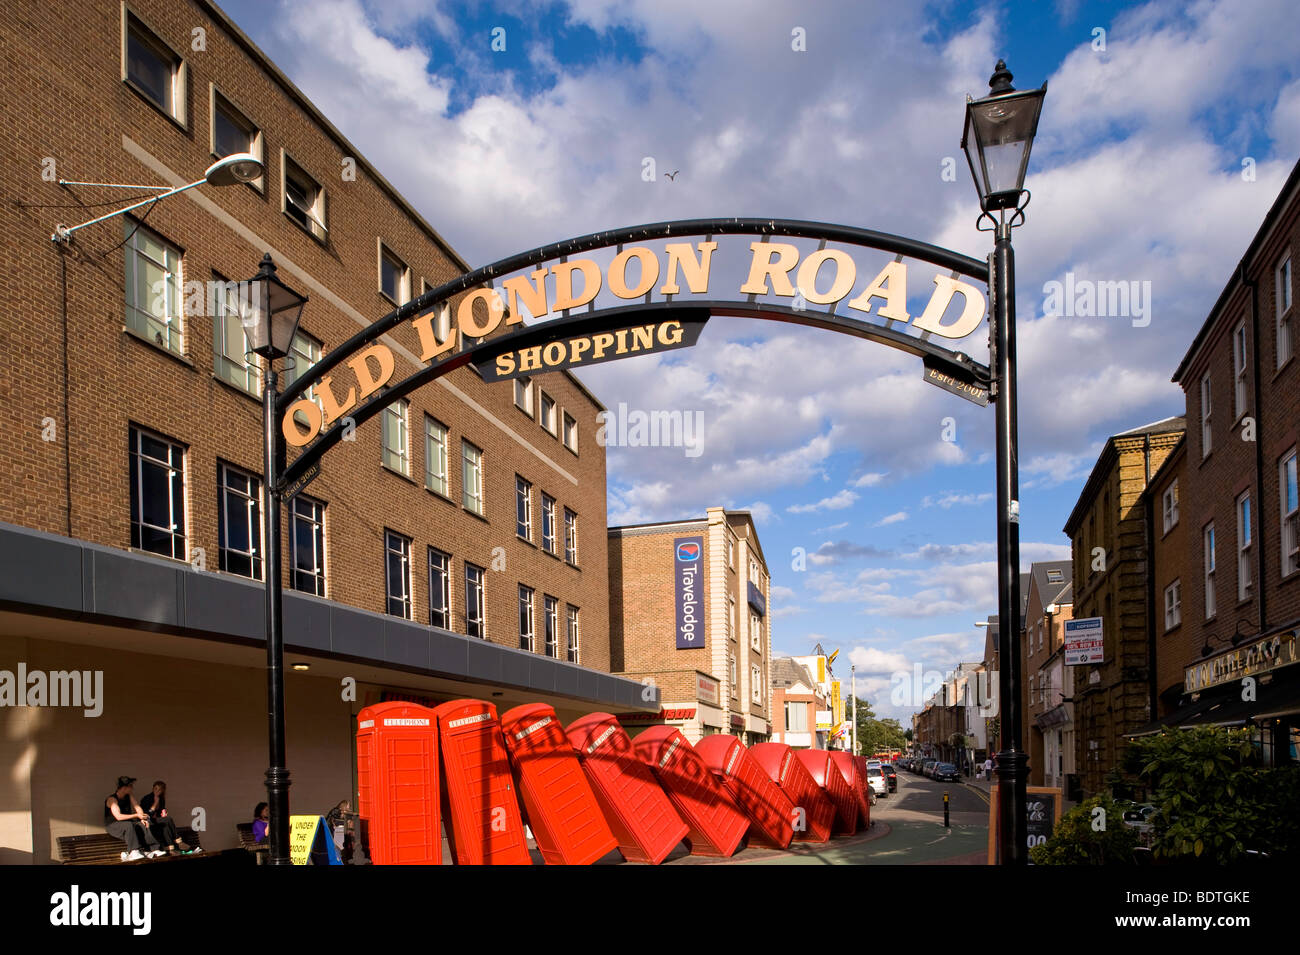 Red phone boxes on Old London Road, Kingstone upon Thames, Surrey, United Kingdom Stock Photo